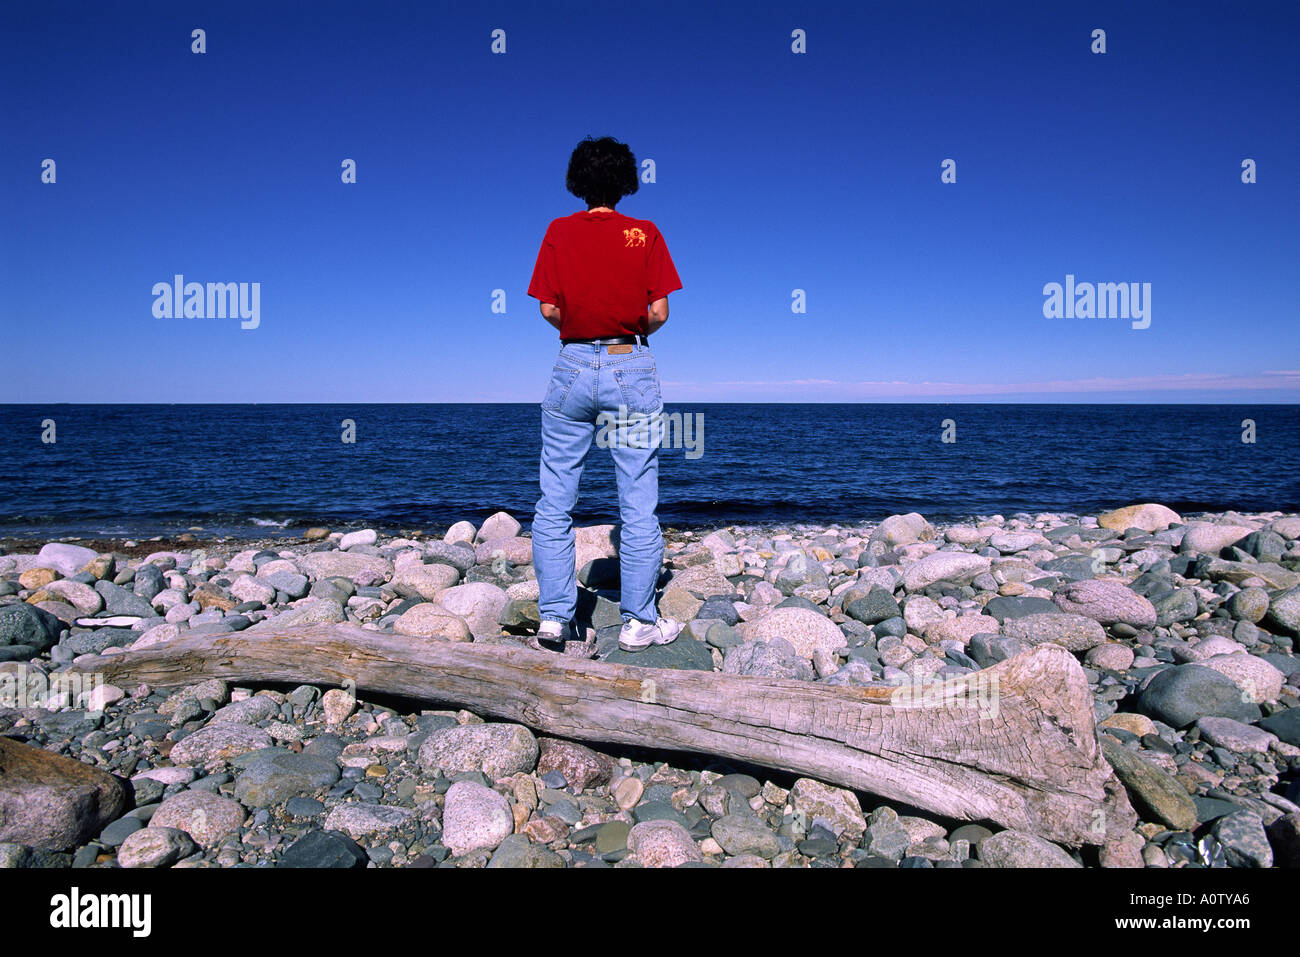 A lone woman looks out at the sea on a rocky beach Stock Photo